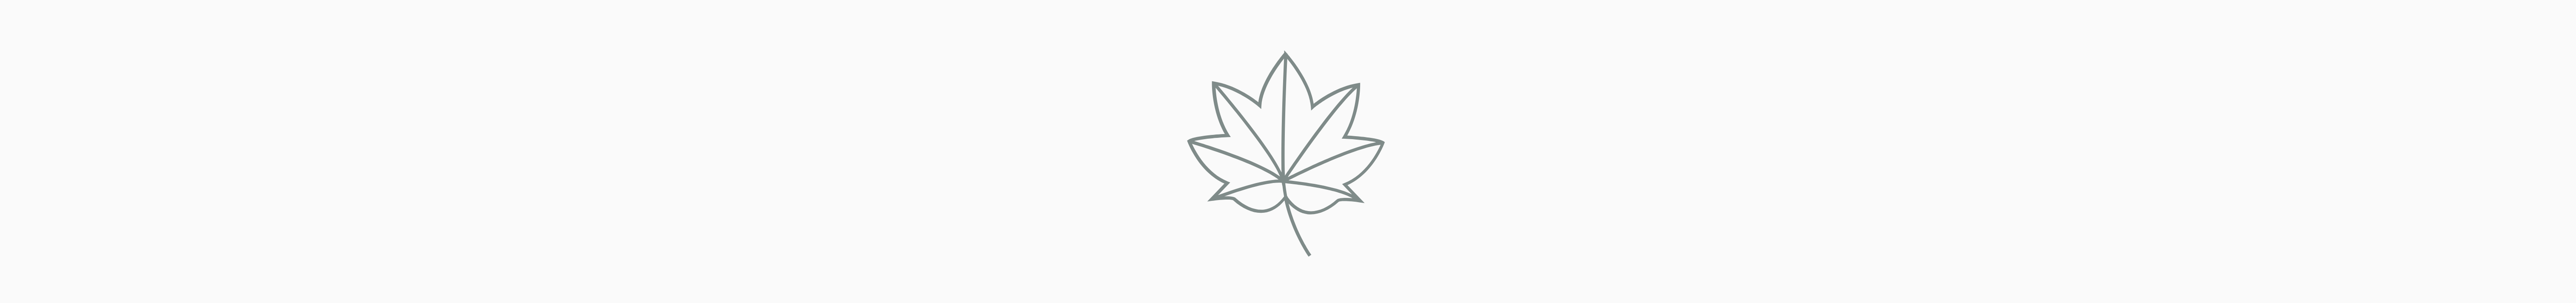 Maple-leaves-icon